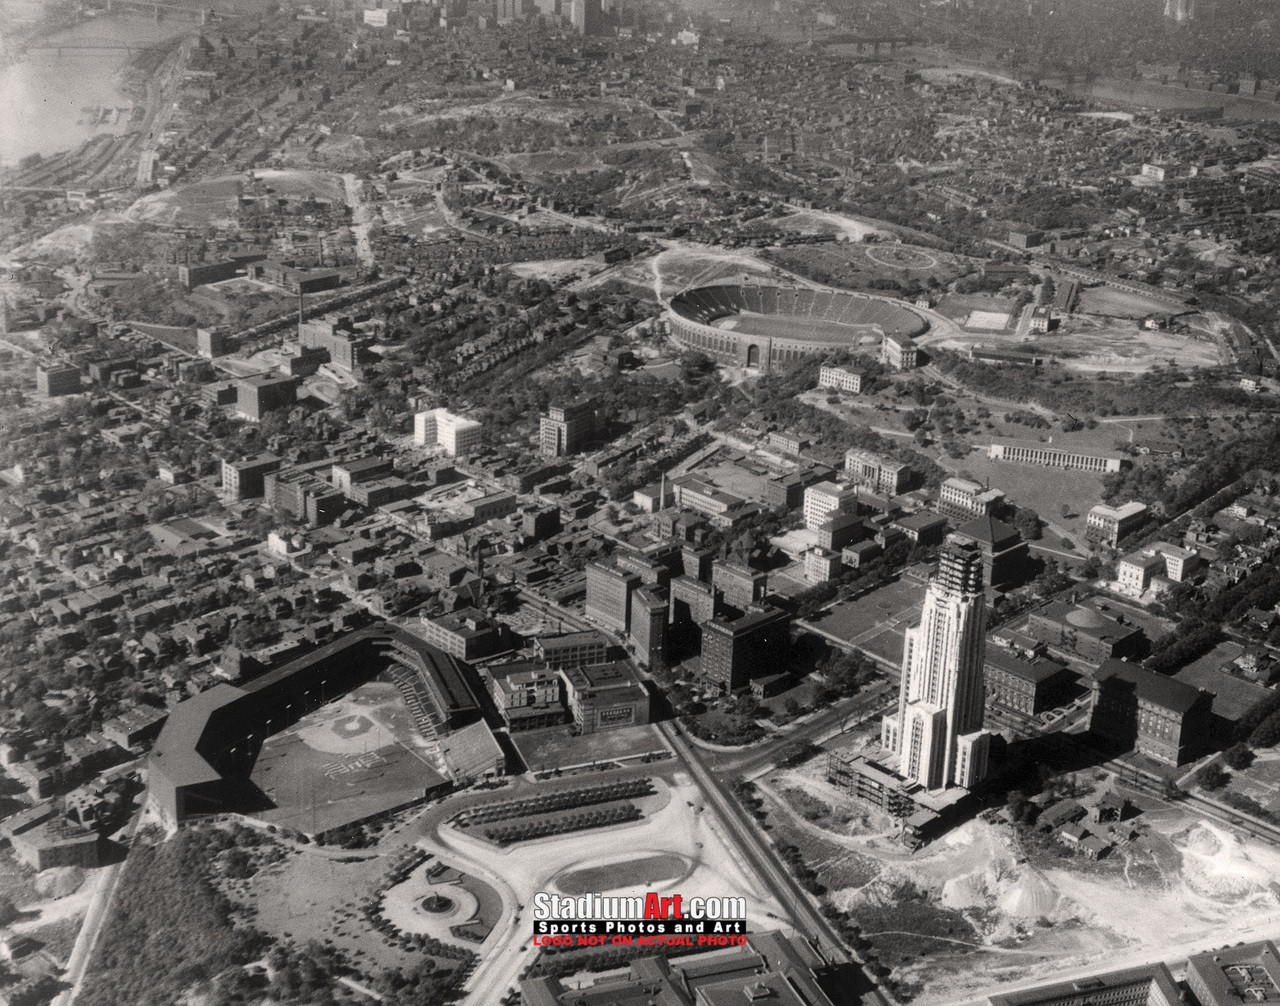 Forbes Field - history, photos and more of the Pittsburgh Pirates